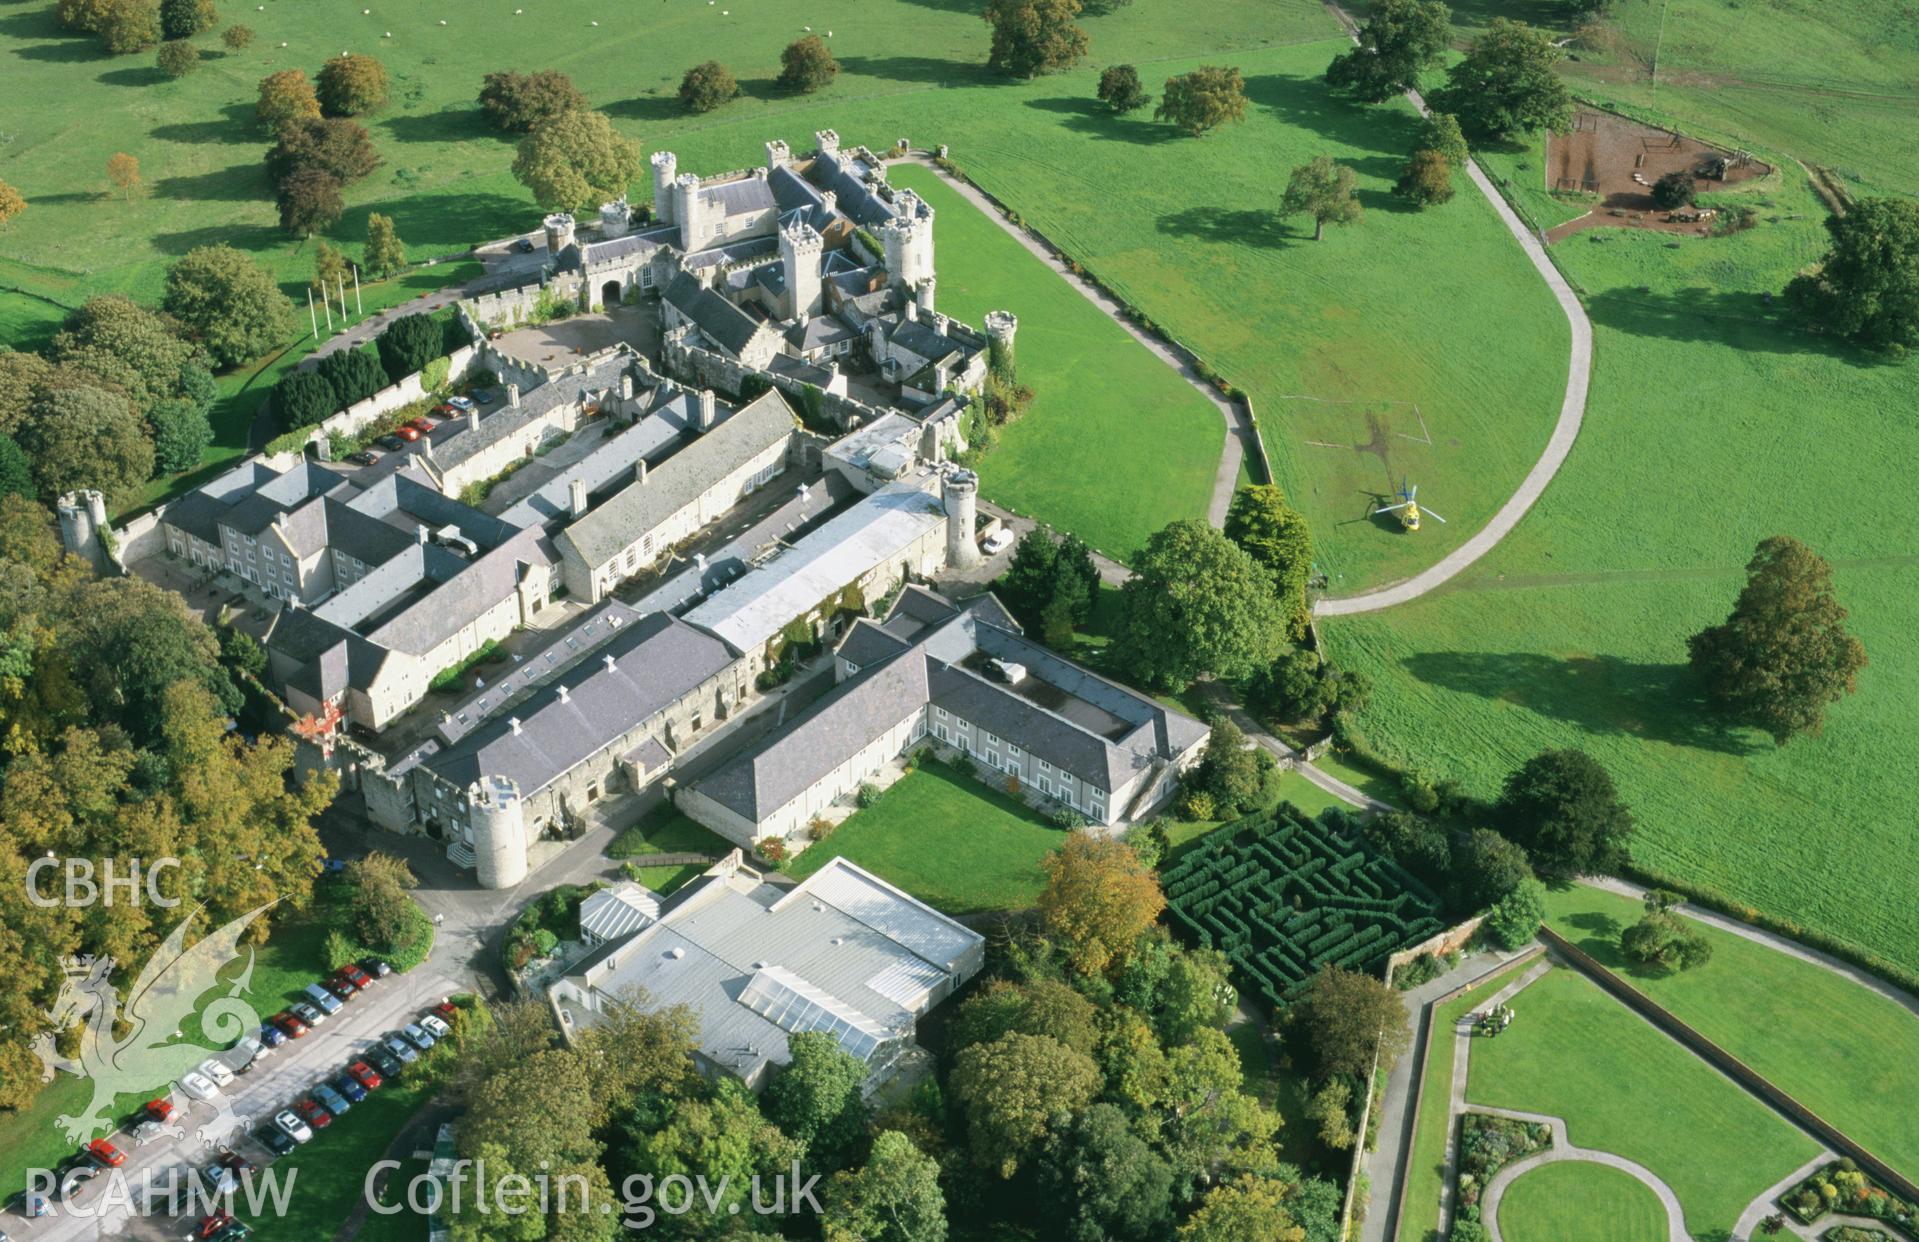 RCAHMW colour slide oblique aerial photograph of Bodelwyddan Castle, Bodelwyddan, taken by T.G.Driver on the 17/10/2000